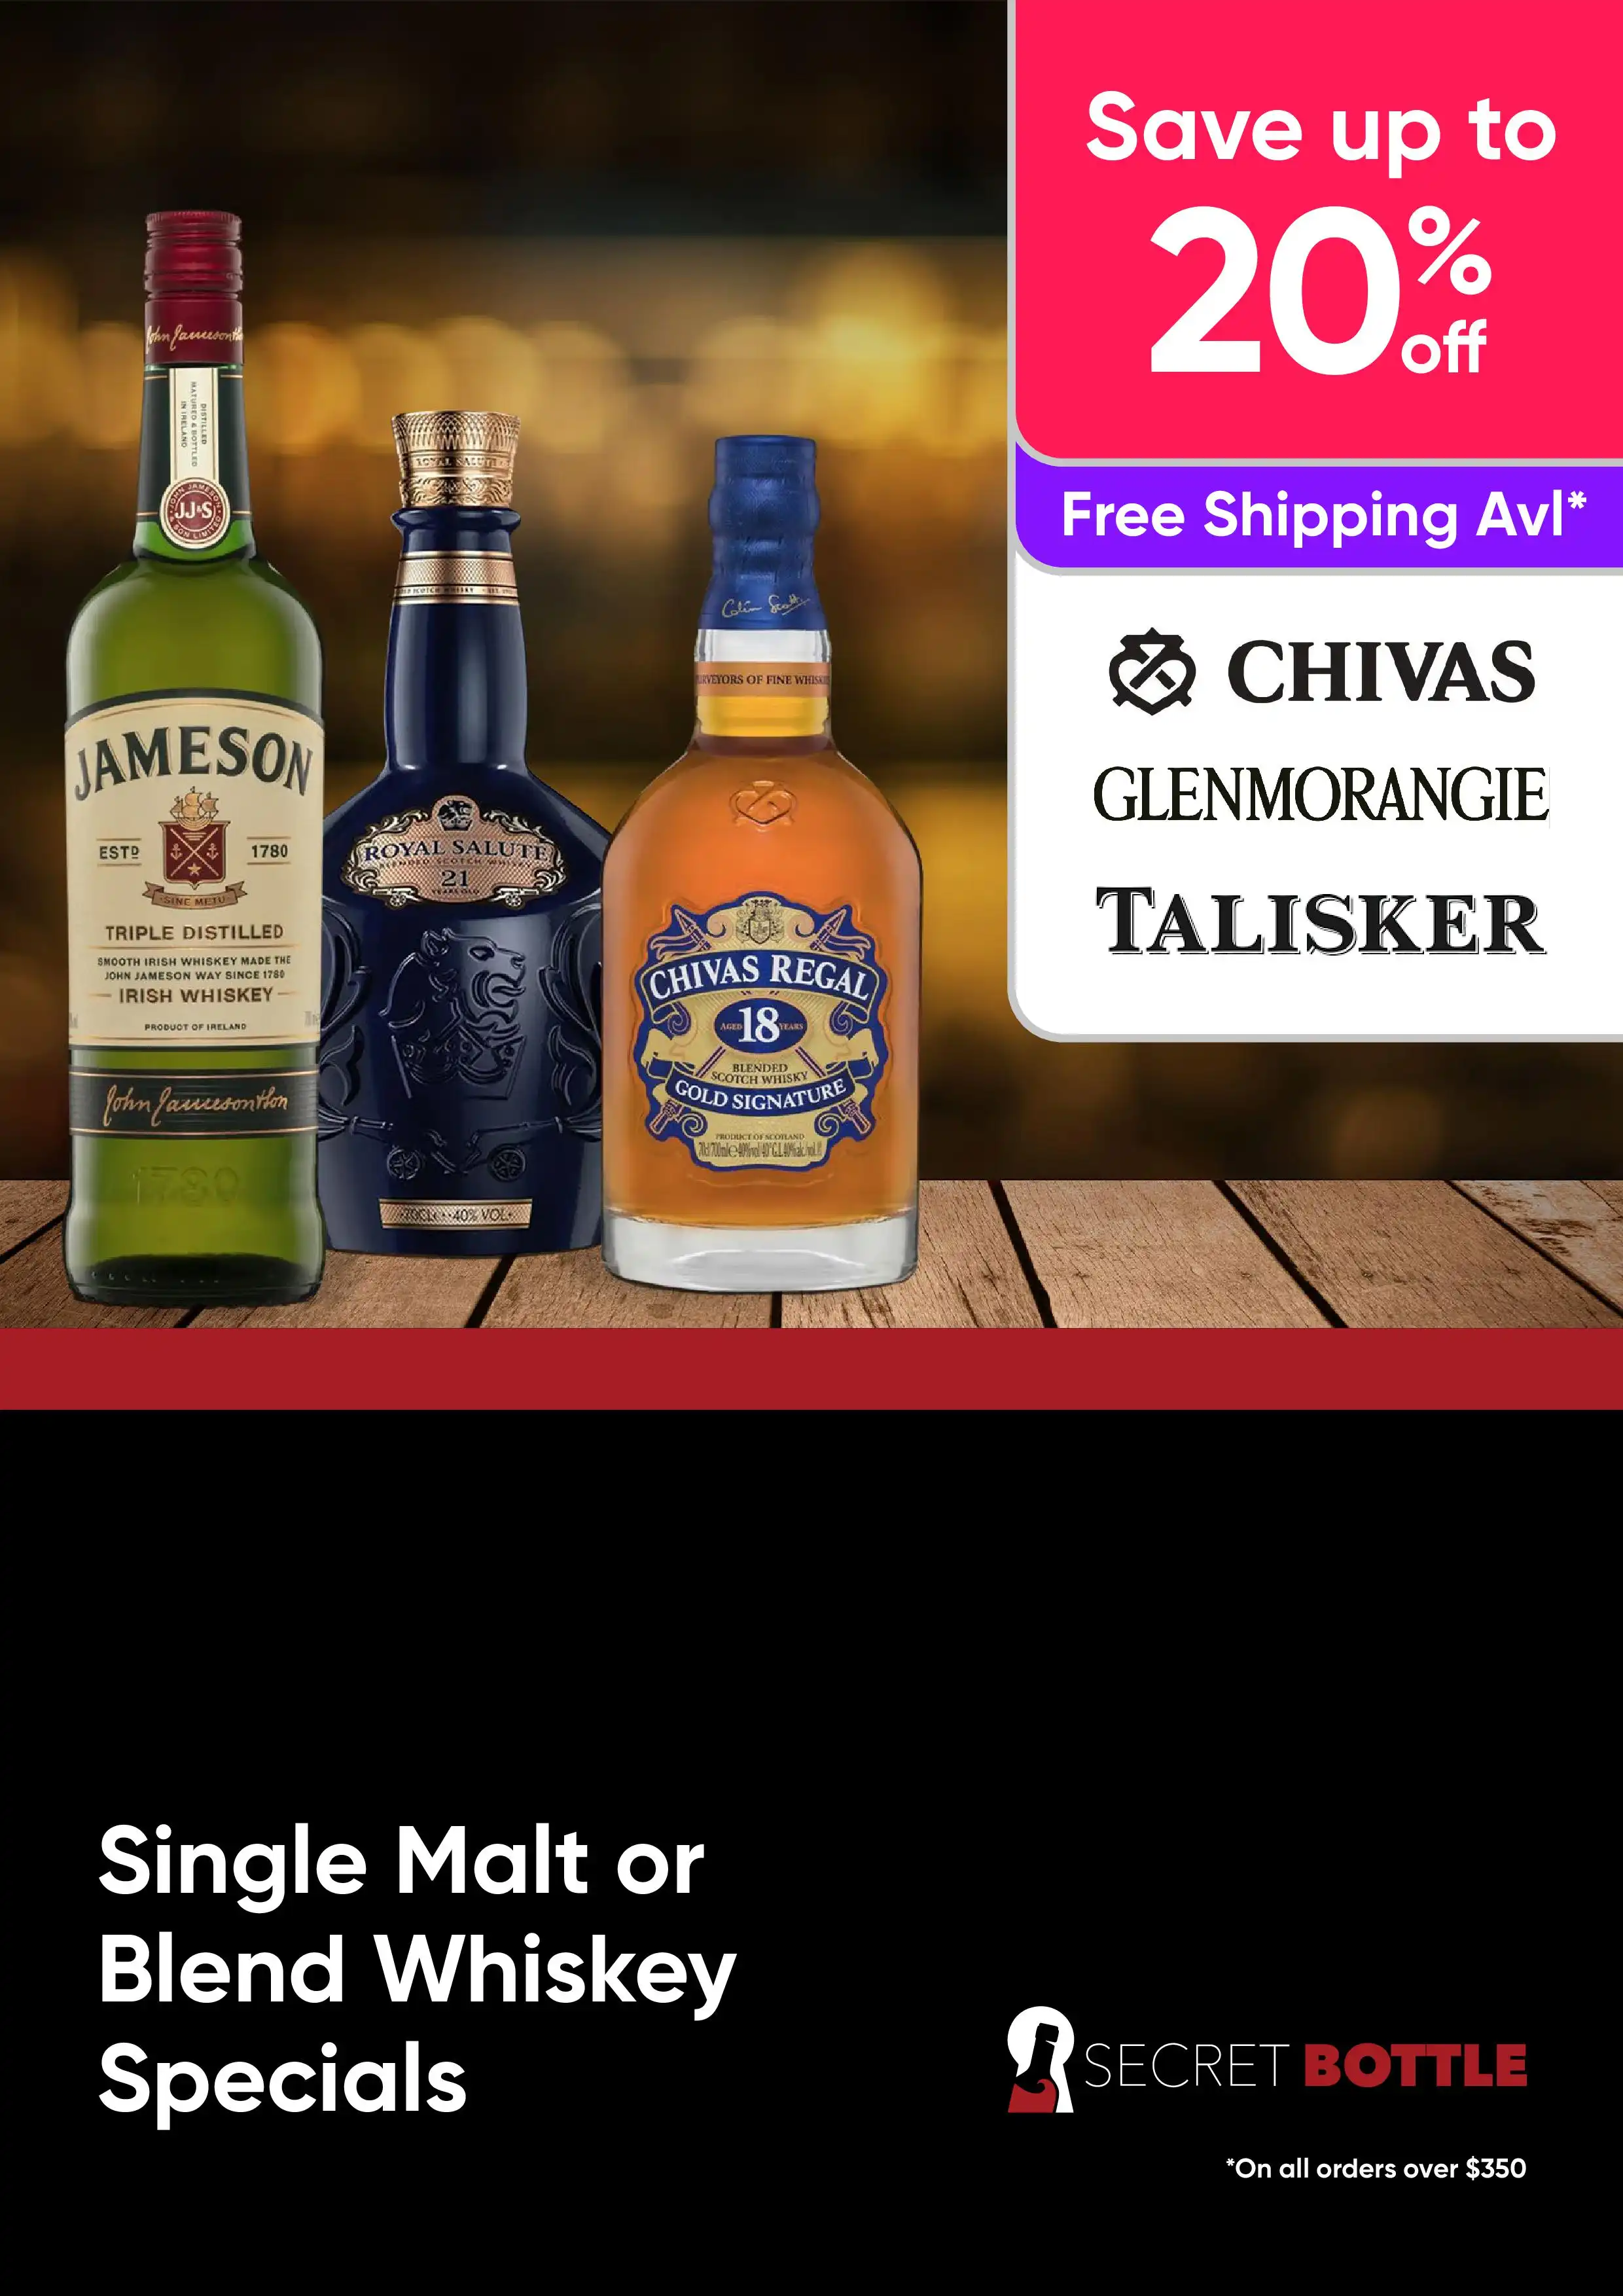 Single Malt or Blend - Whiskey Specials on Sale Now. Save up to 20% Off